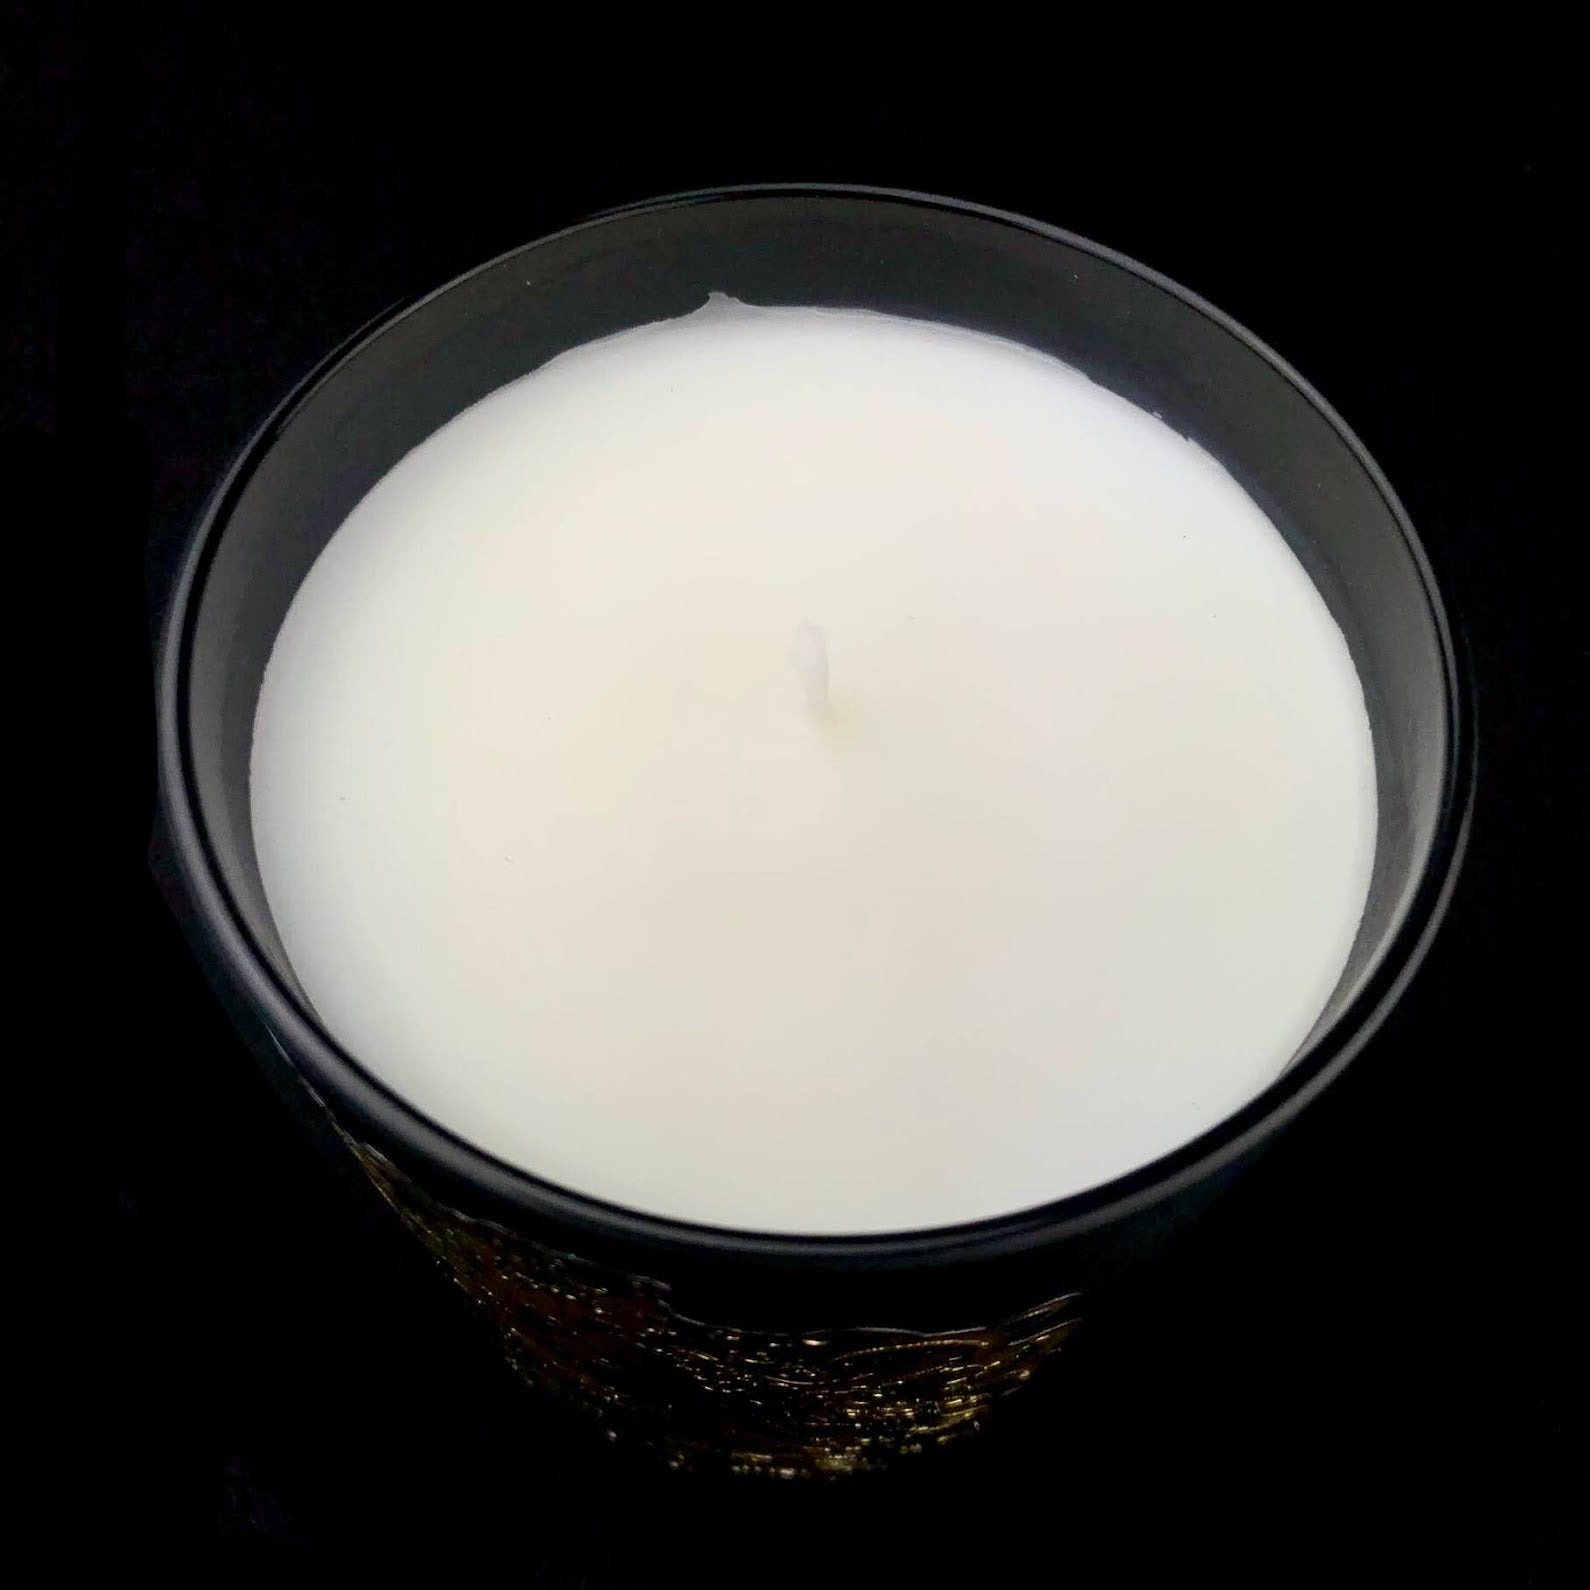 The Kindness Candle